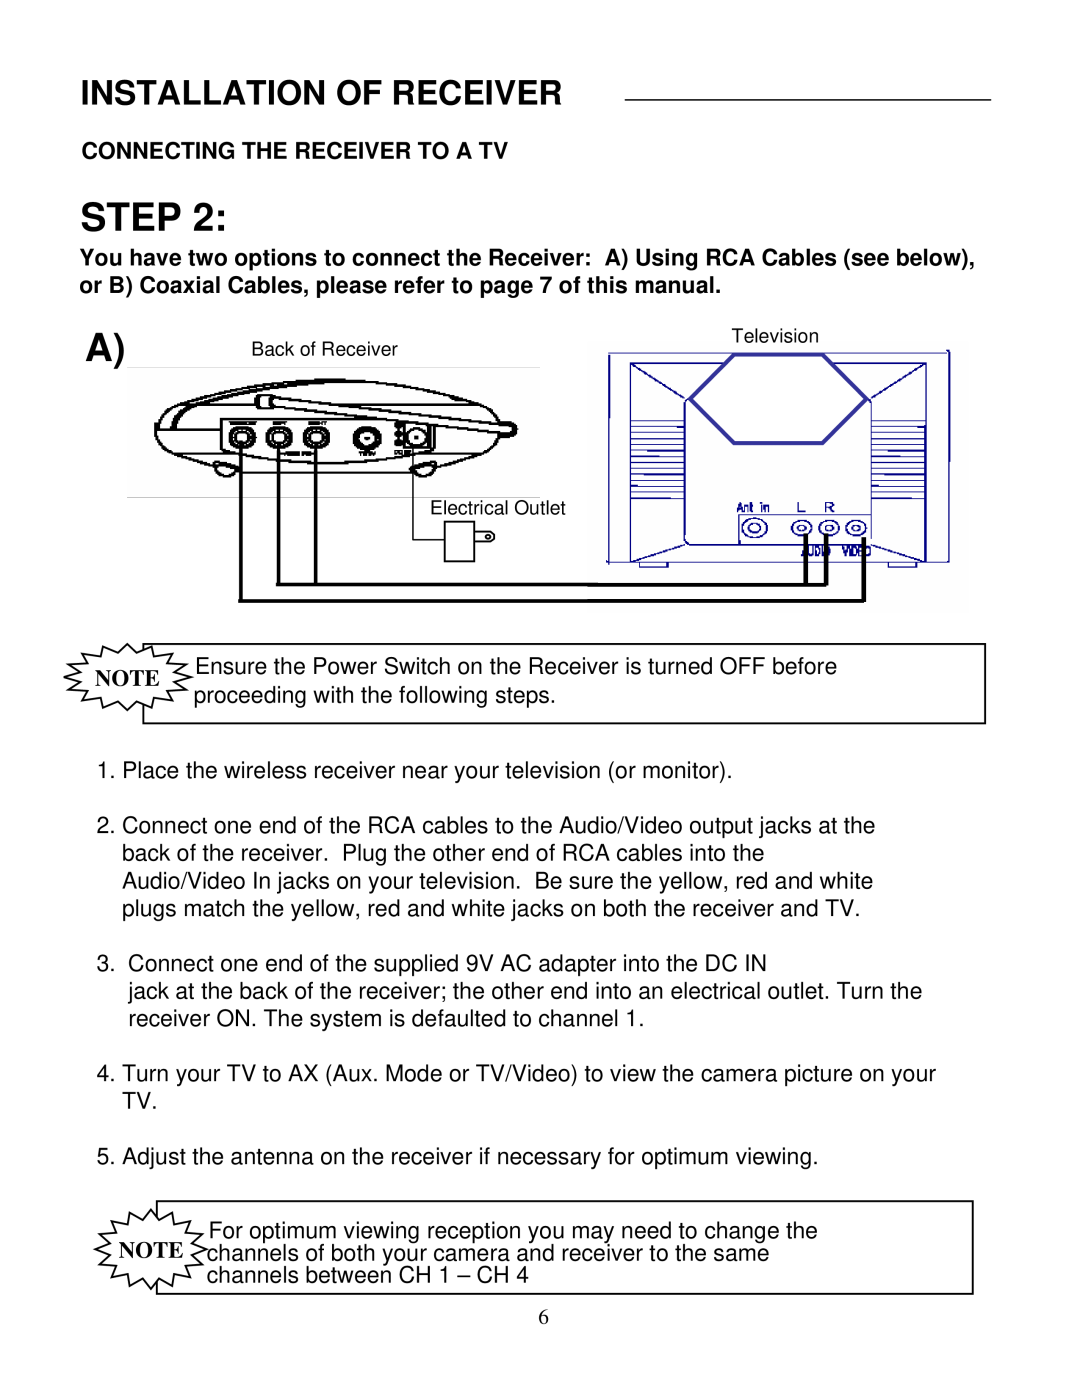 LOREX Technology SG6352 instruction manual Installation Of Receiver, Connecting The Receiver To A Tv, Step 